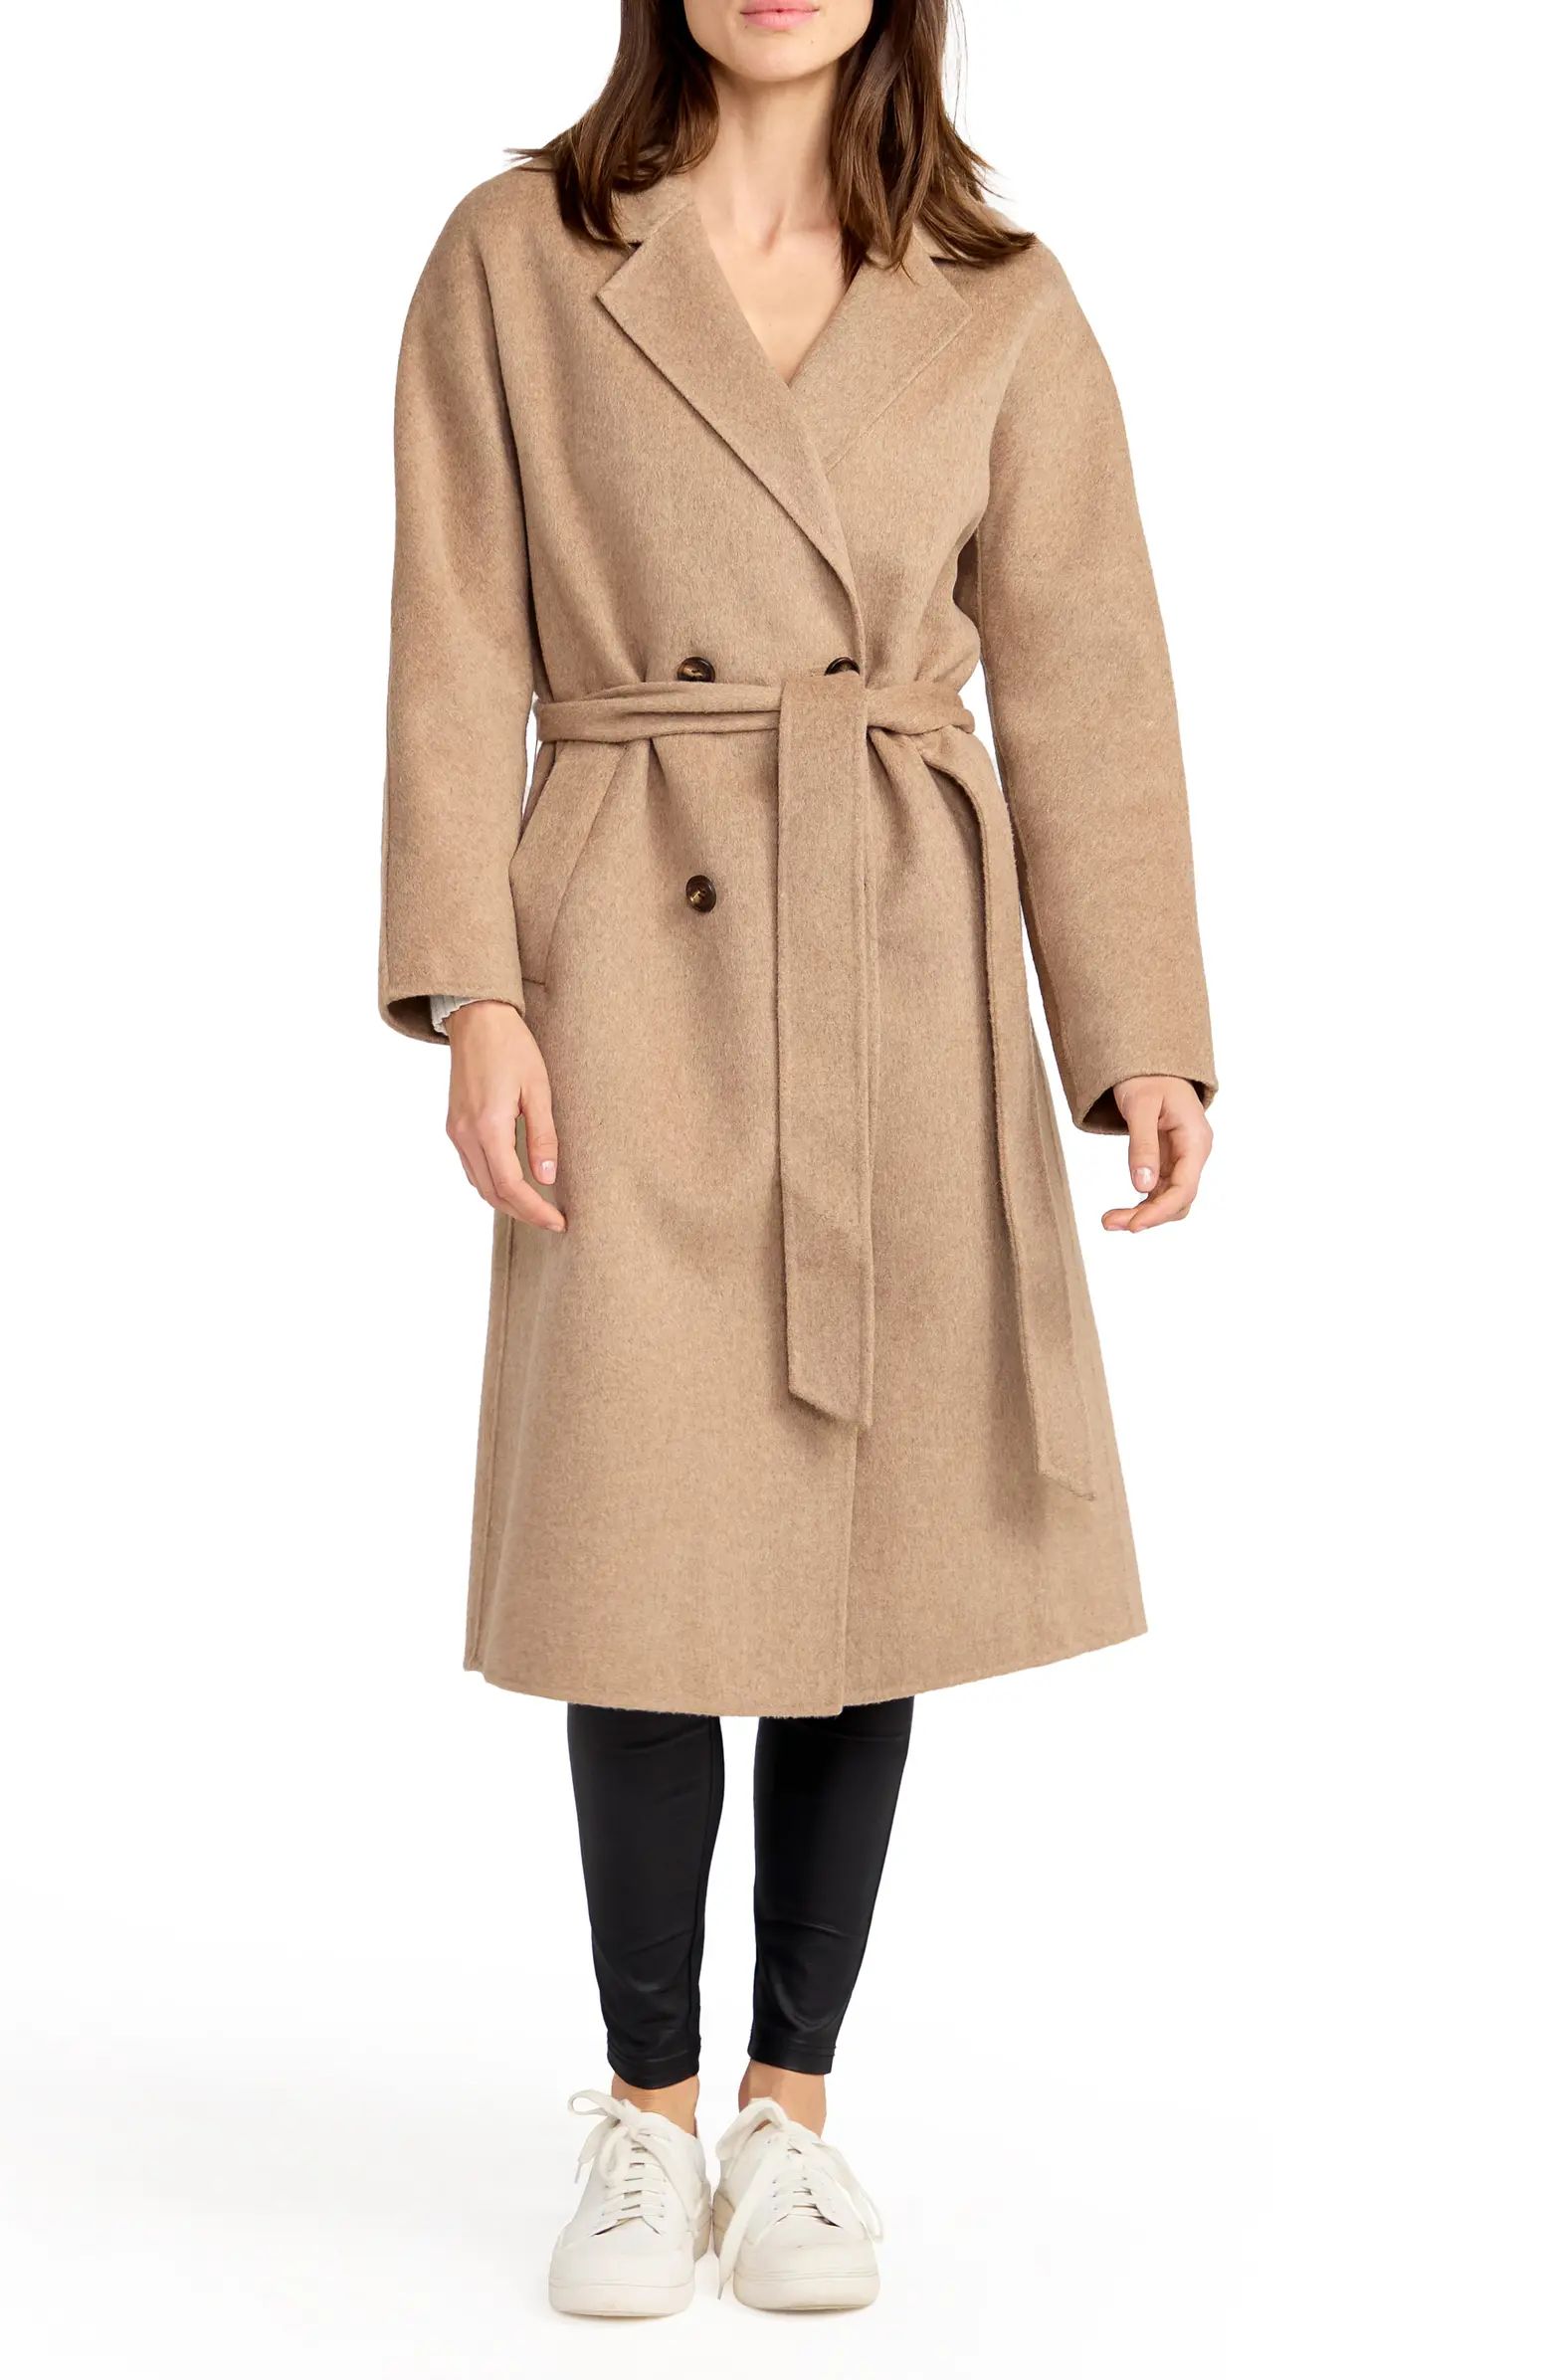 BELLE AND BLOOM Standing Still Belted Double Breasted Wool Blend Coat | Nordstrom | Nordstrom